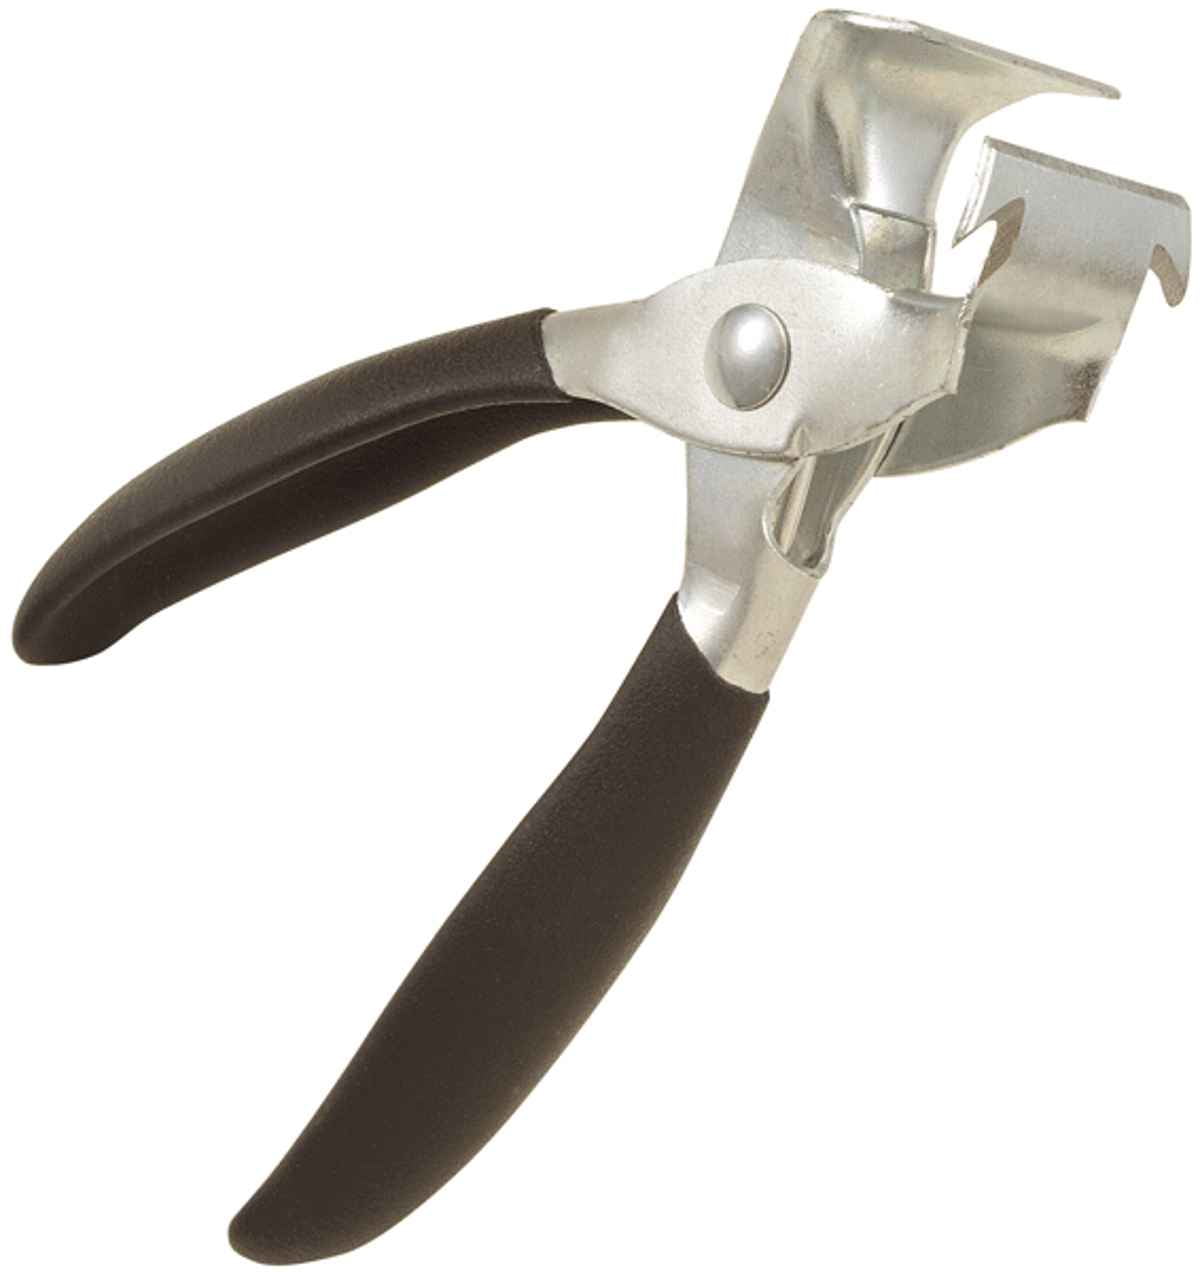 H&H SP100 Skining Plier With Cutter Stainless Steel 